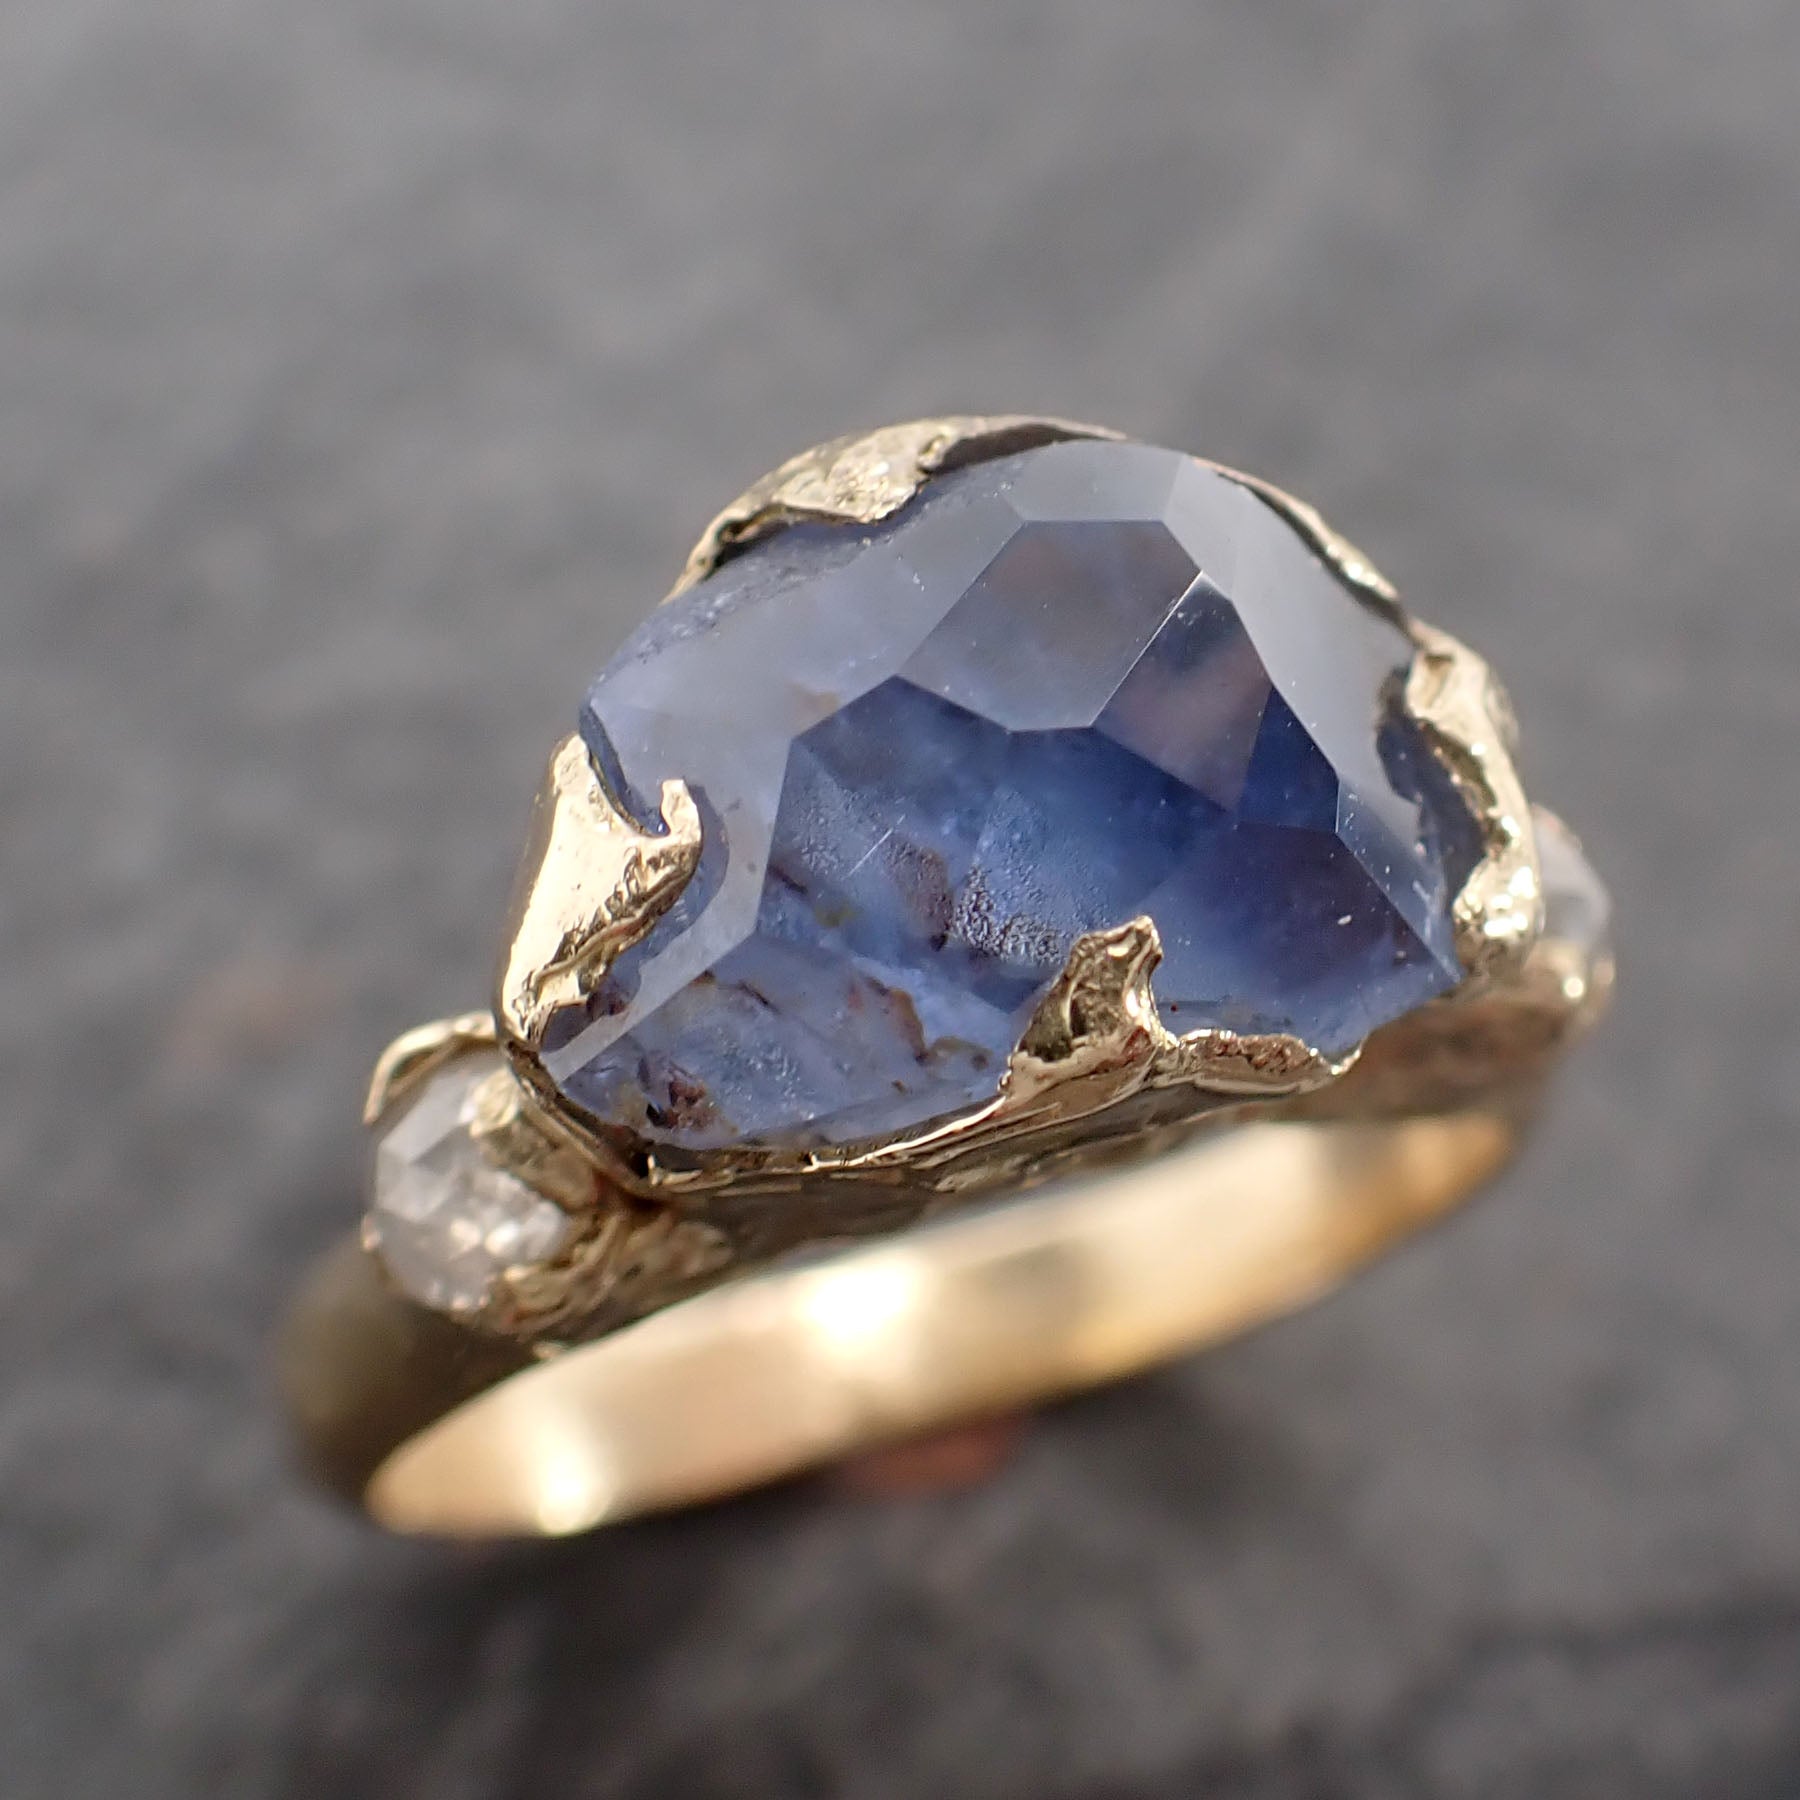 Partially faceted blue Montana Sapphire and fancy Diamonds 18k Yellow Gold Engagement Wedding Ring Gemstone Ring Multi stone Ring 2515